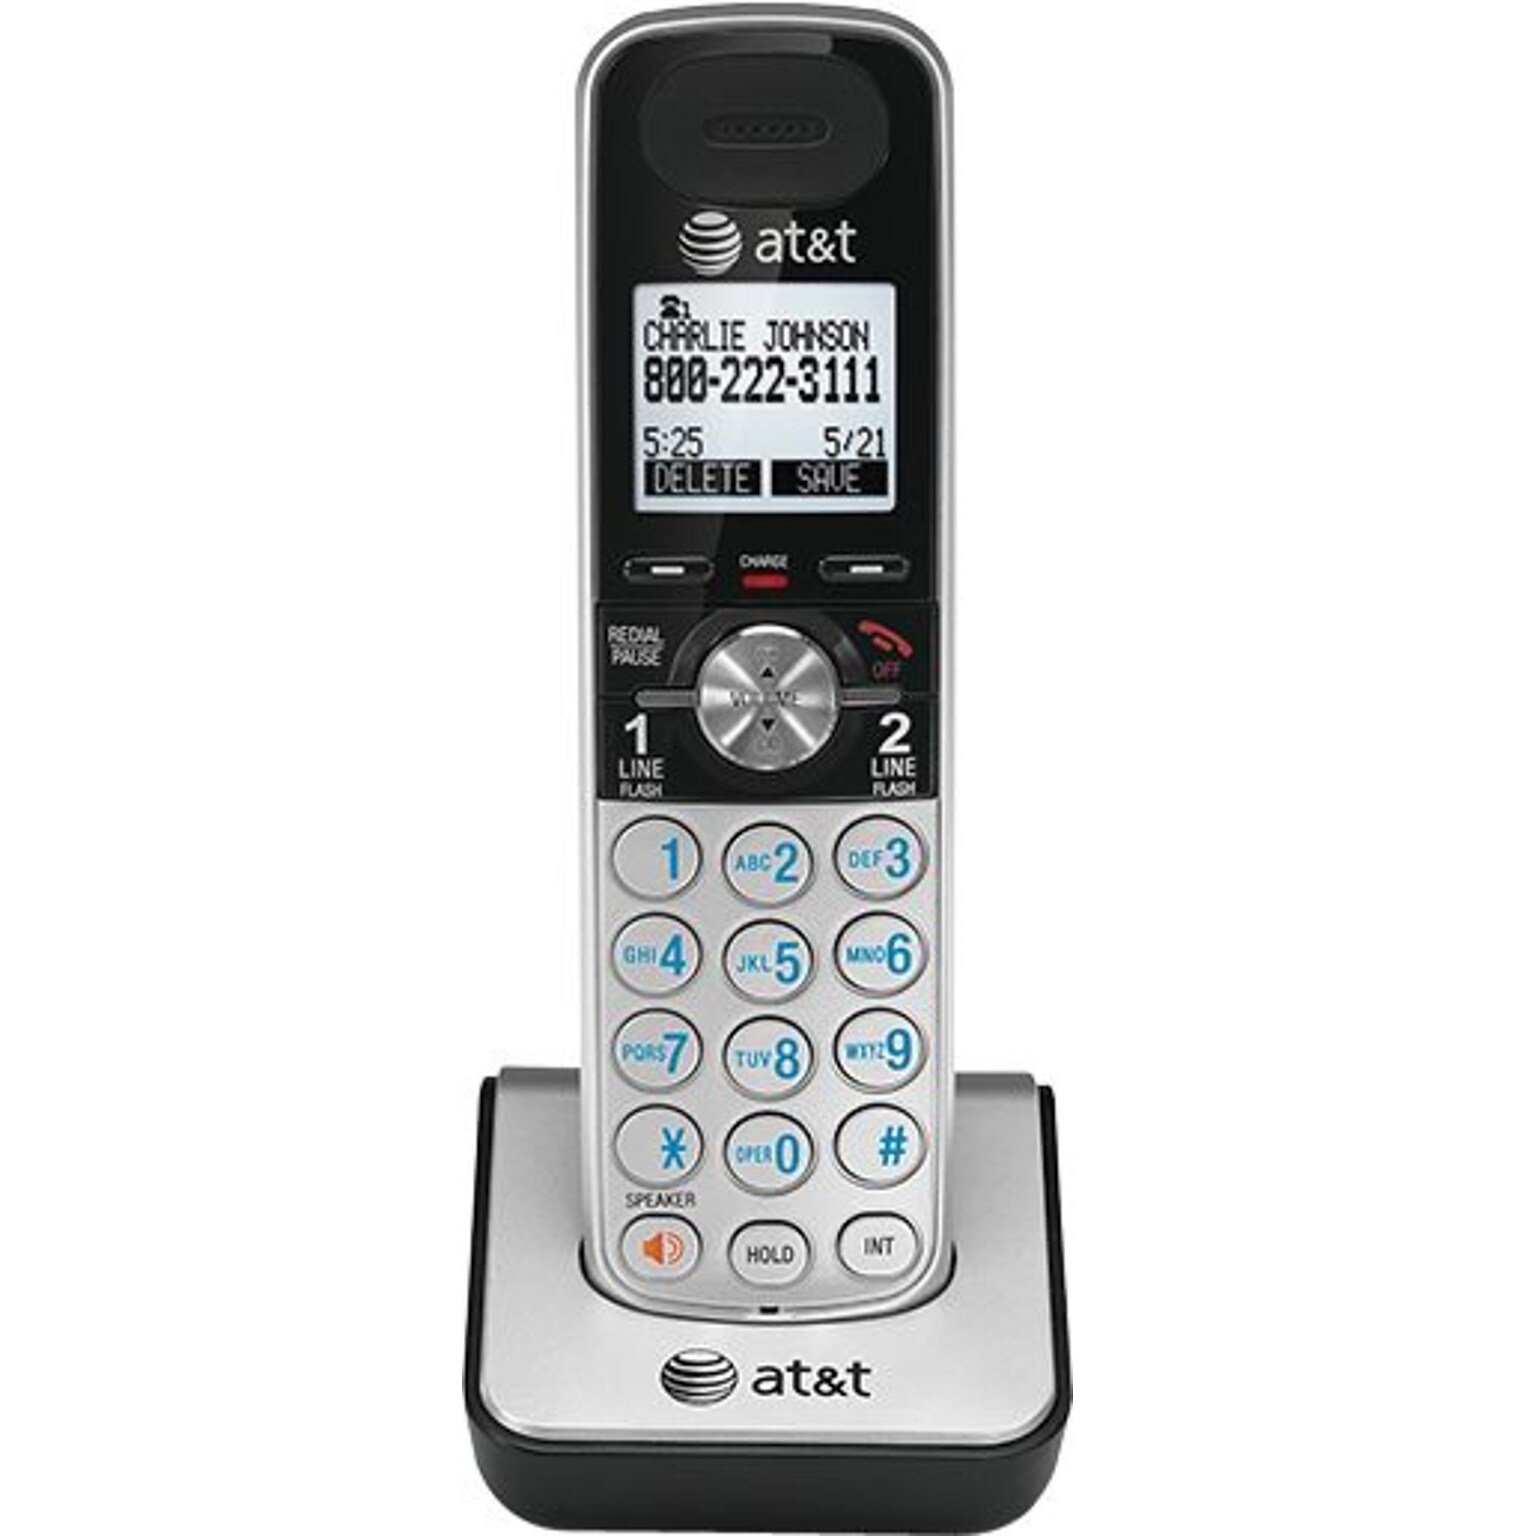 AT&T Cordless Telephone, Silver/Black (TL88002)